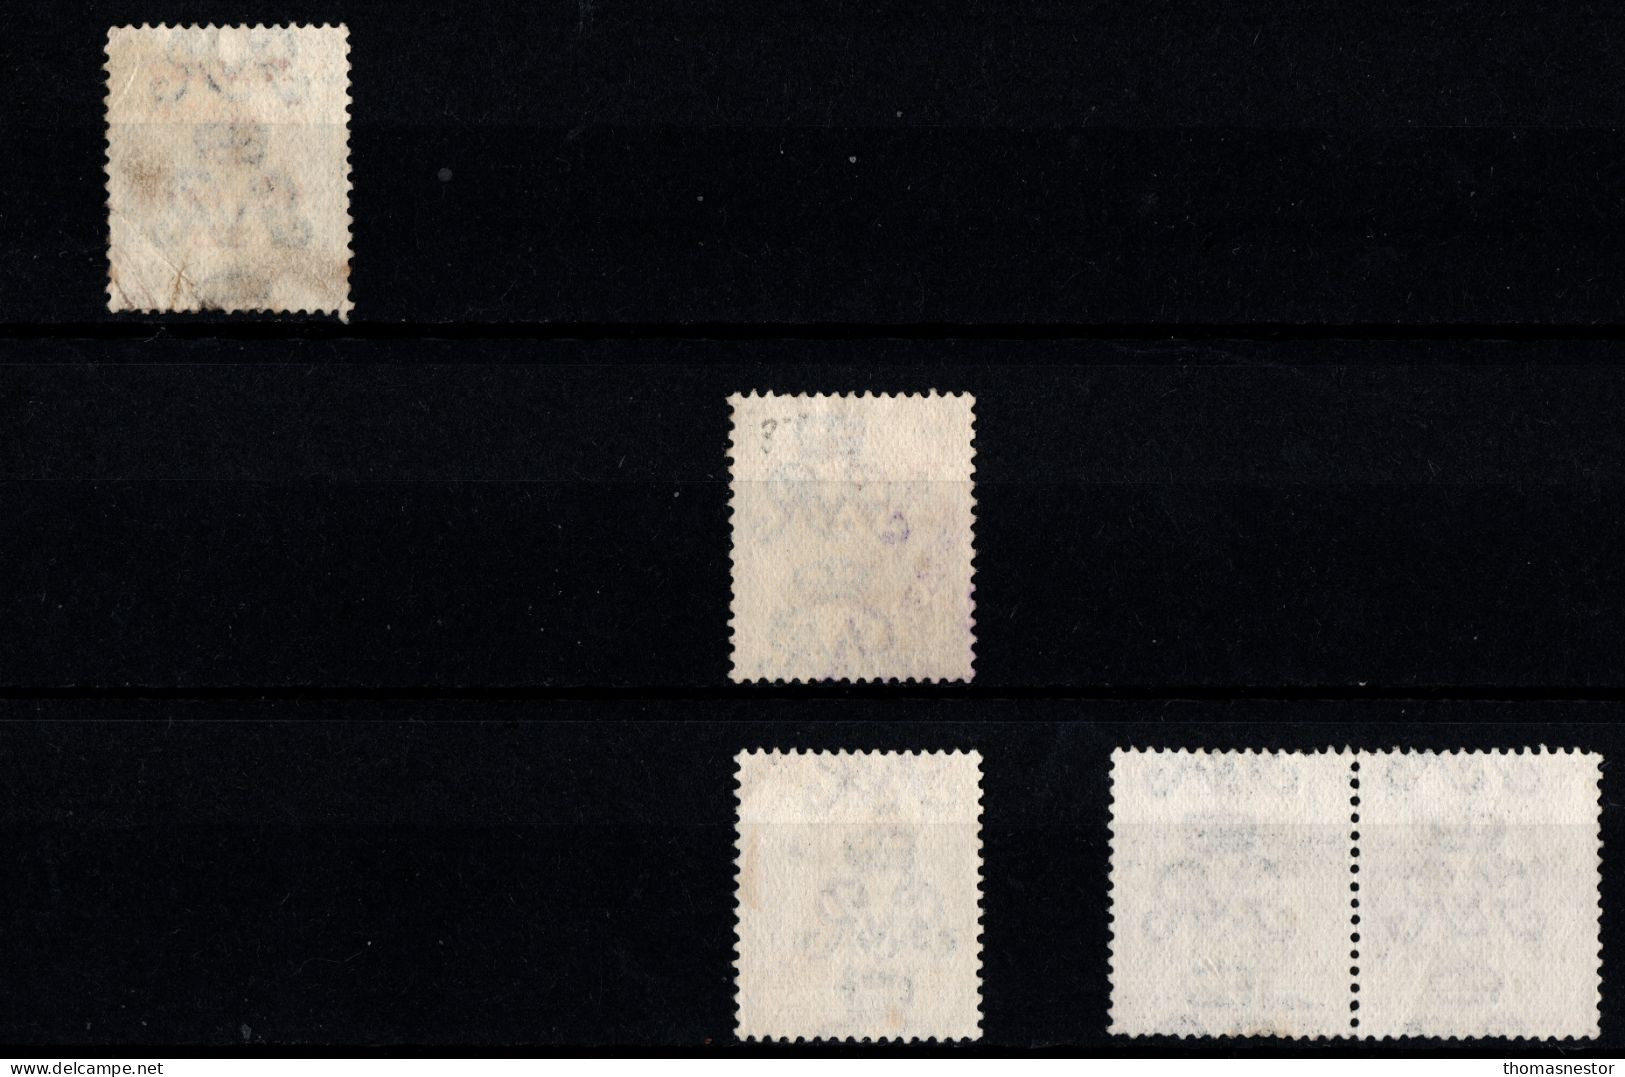 1922 Thom Rialtas 5 line Blue Black Ink (July- Nov) Used Fiscal cancellation, parcel/ commercial cancel 293 in total.